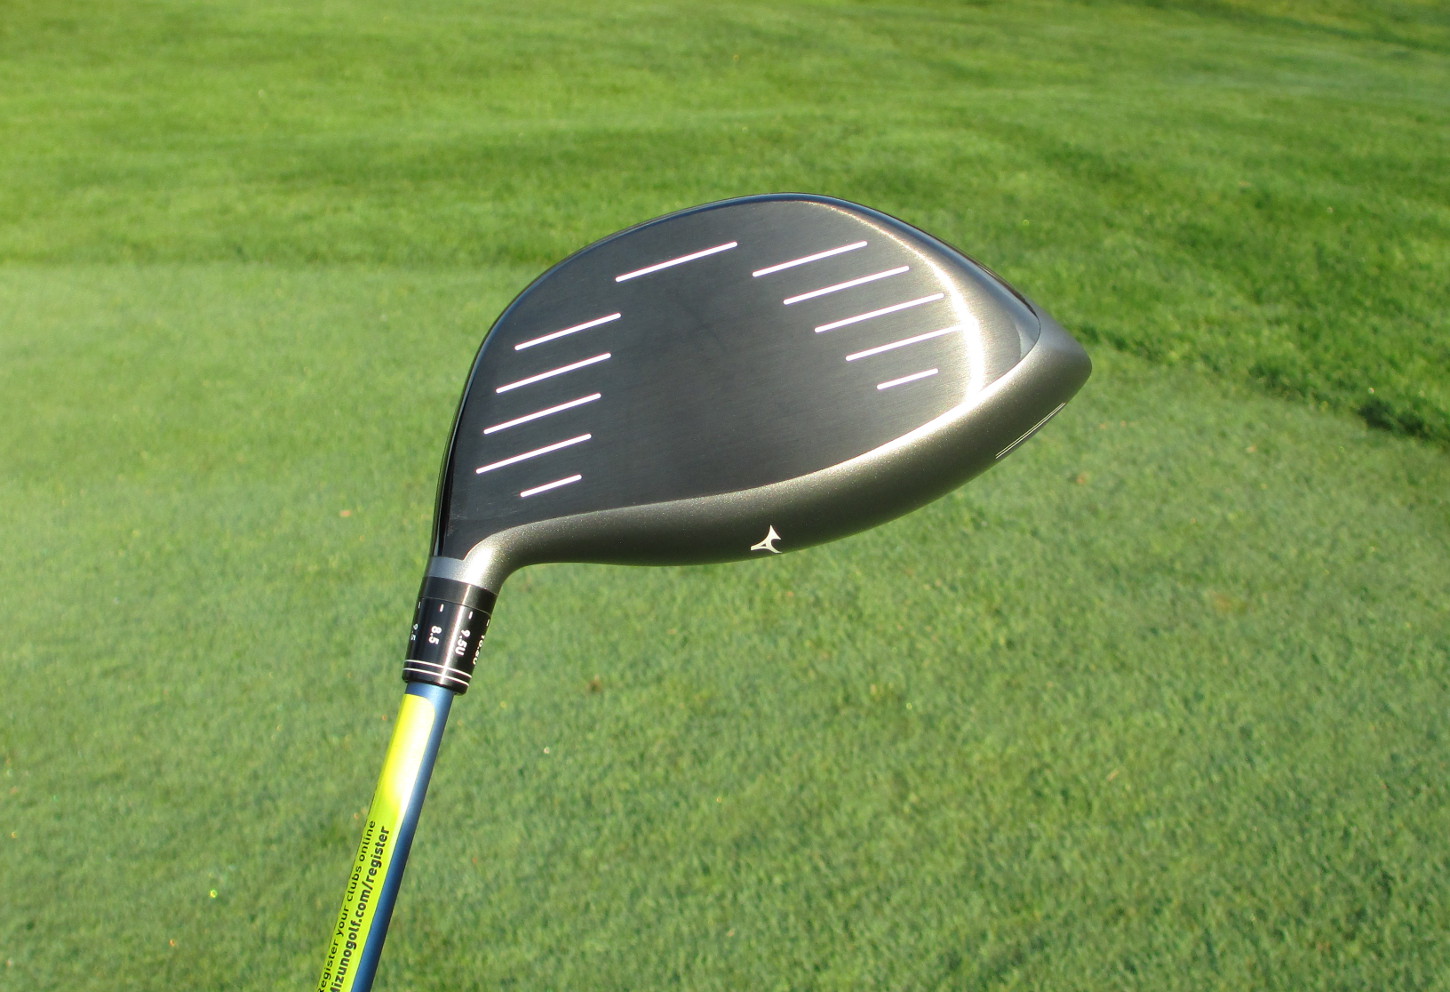 The JPX EZ provides a pretty deep face for a game improvement driver.